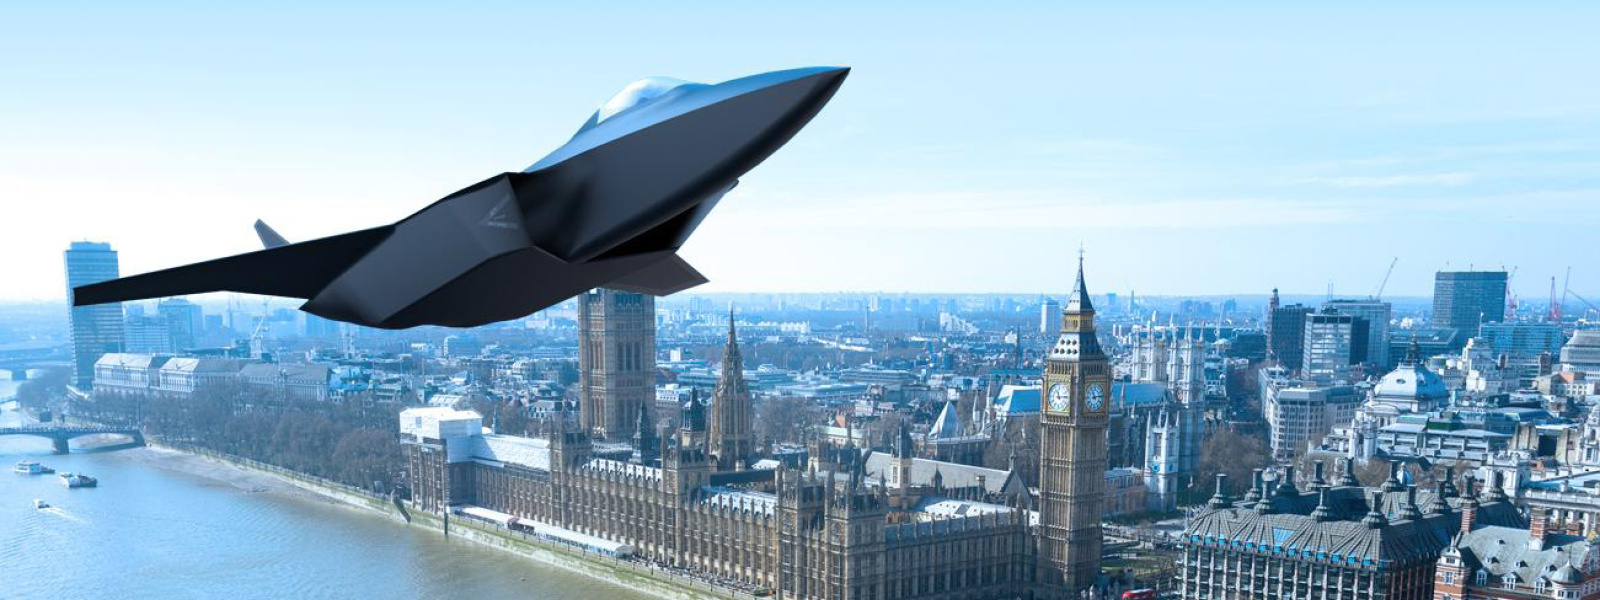 Artists impression of Tempest over London